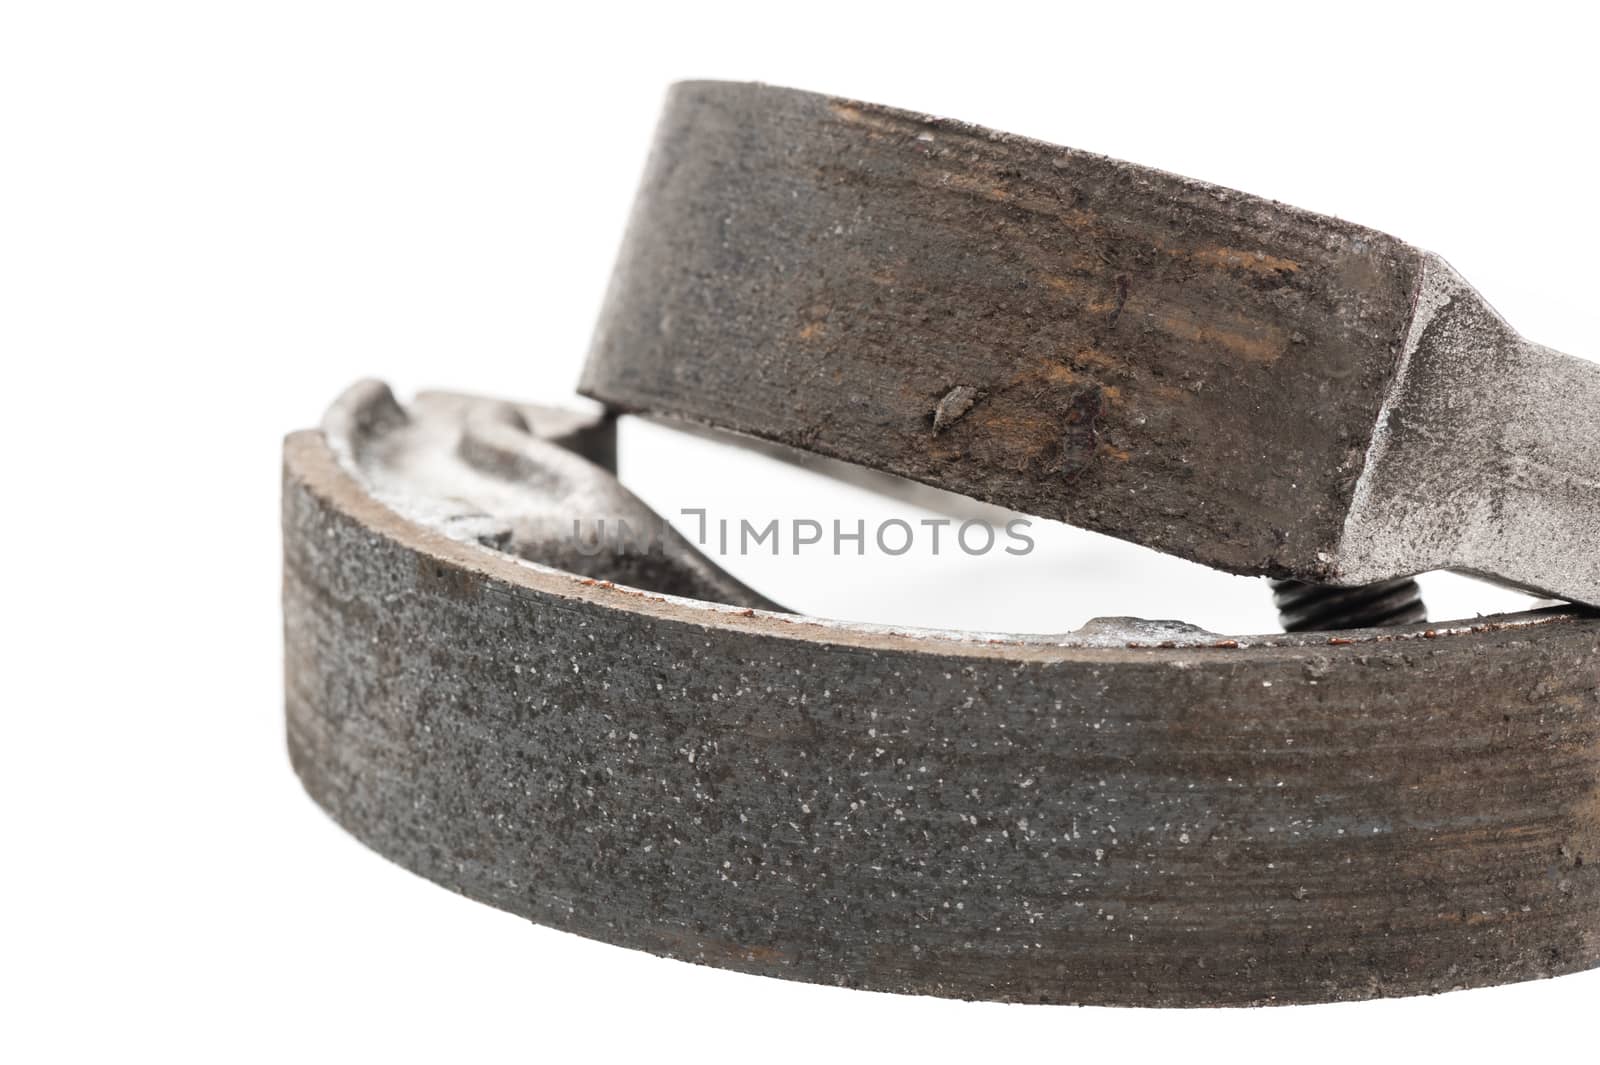 worn motorcycle drum breaks shoes isolated on white background